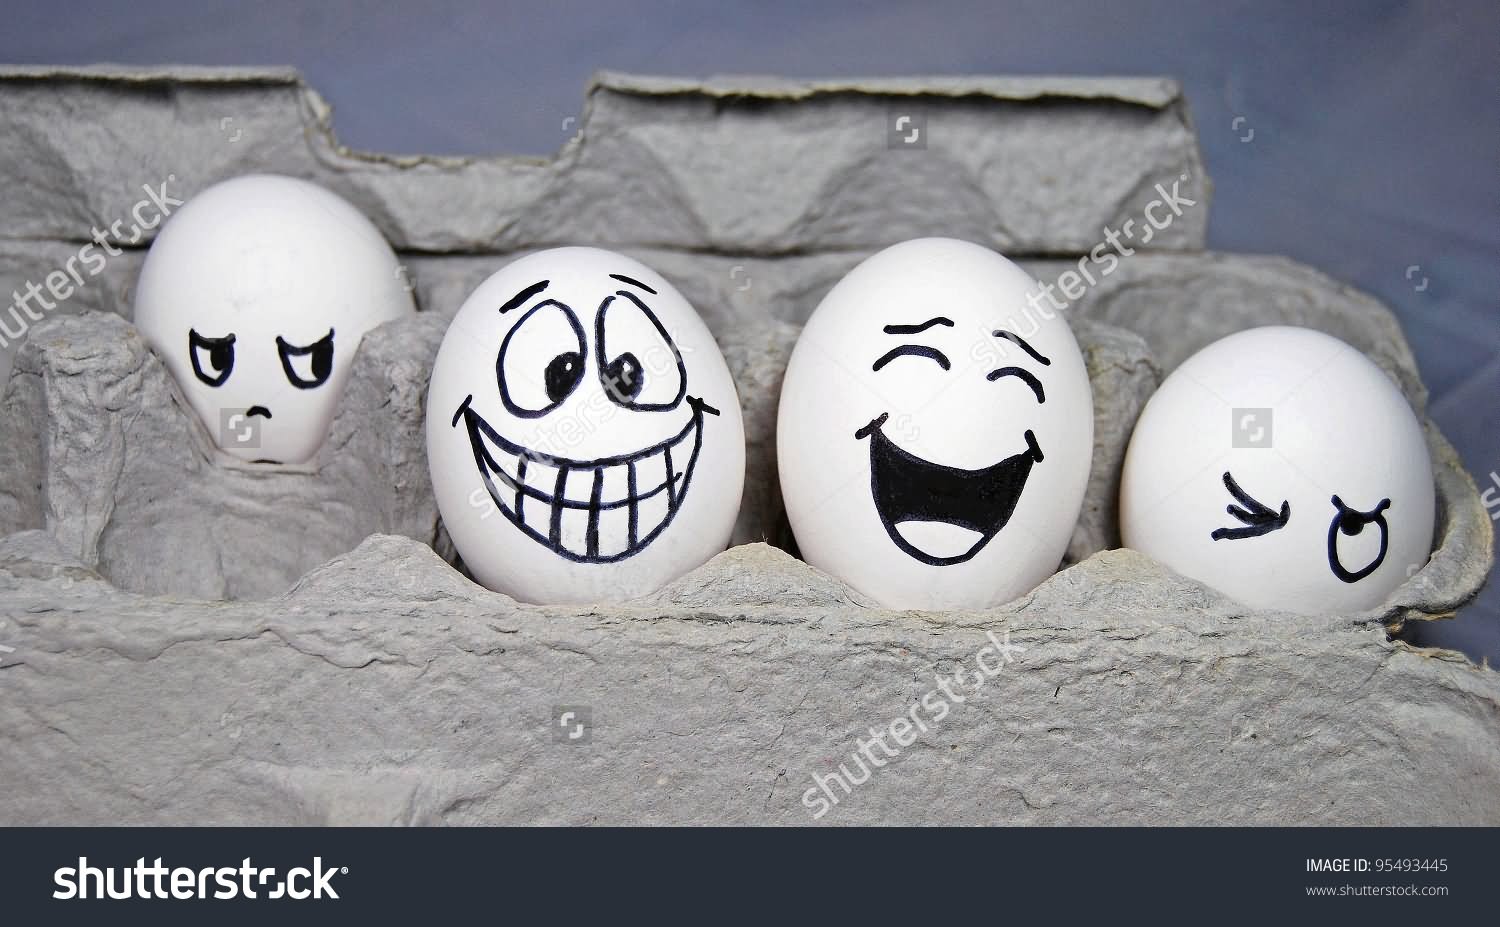 Eggs Funny Faces Art Picture